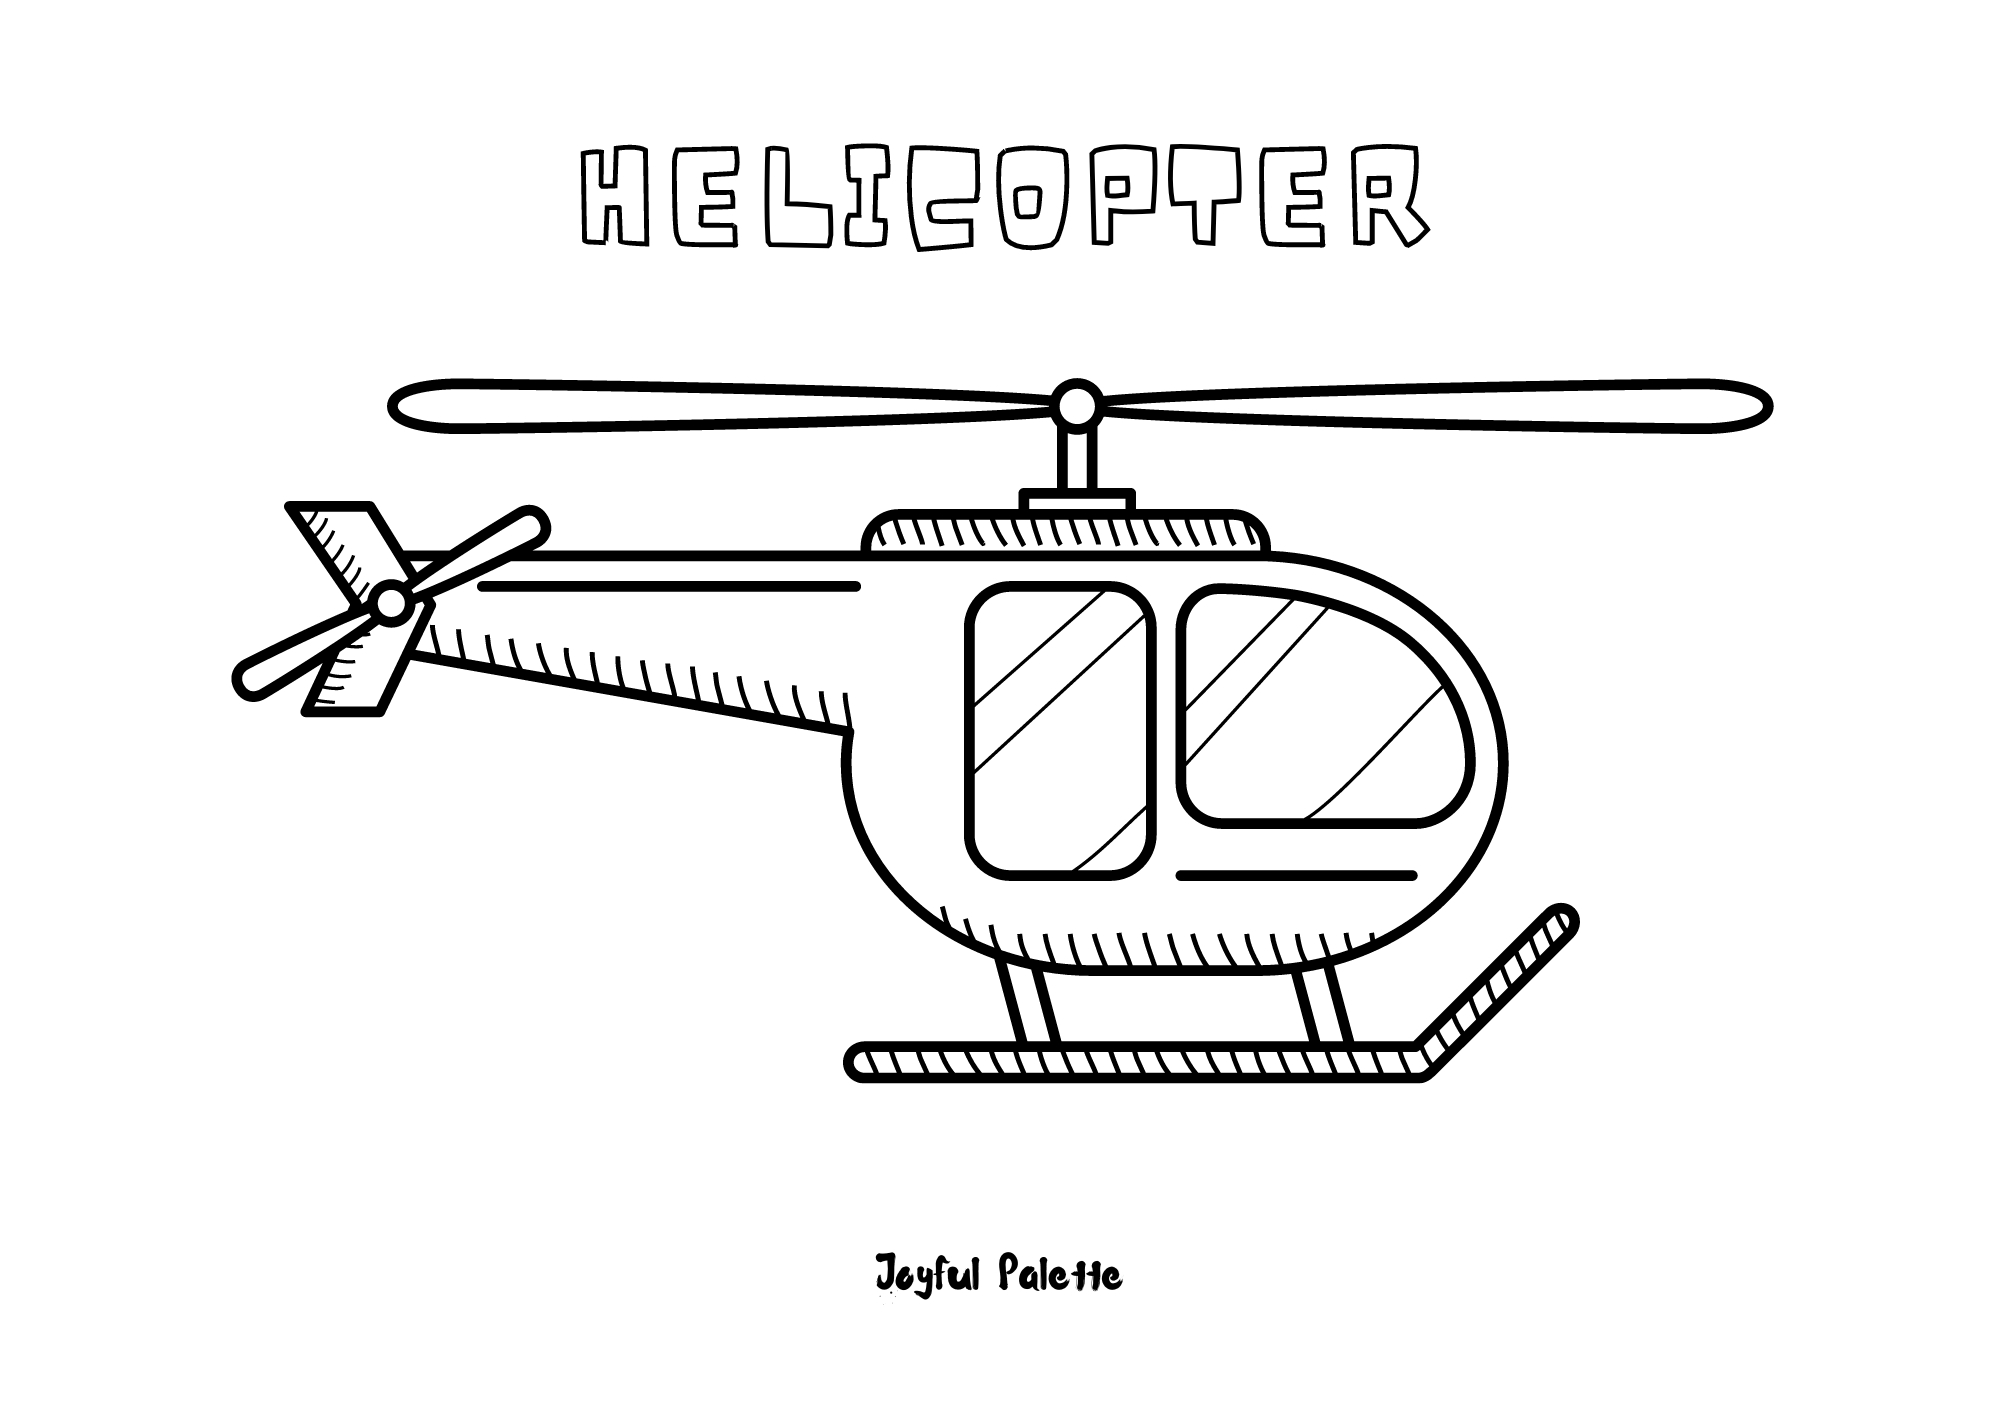 Helicopter Coloring Page